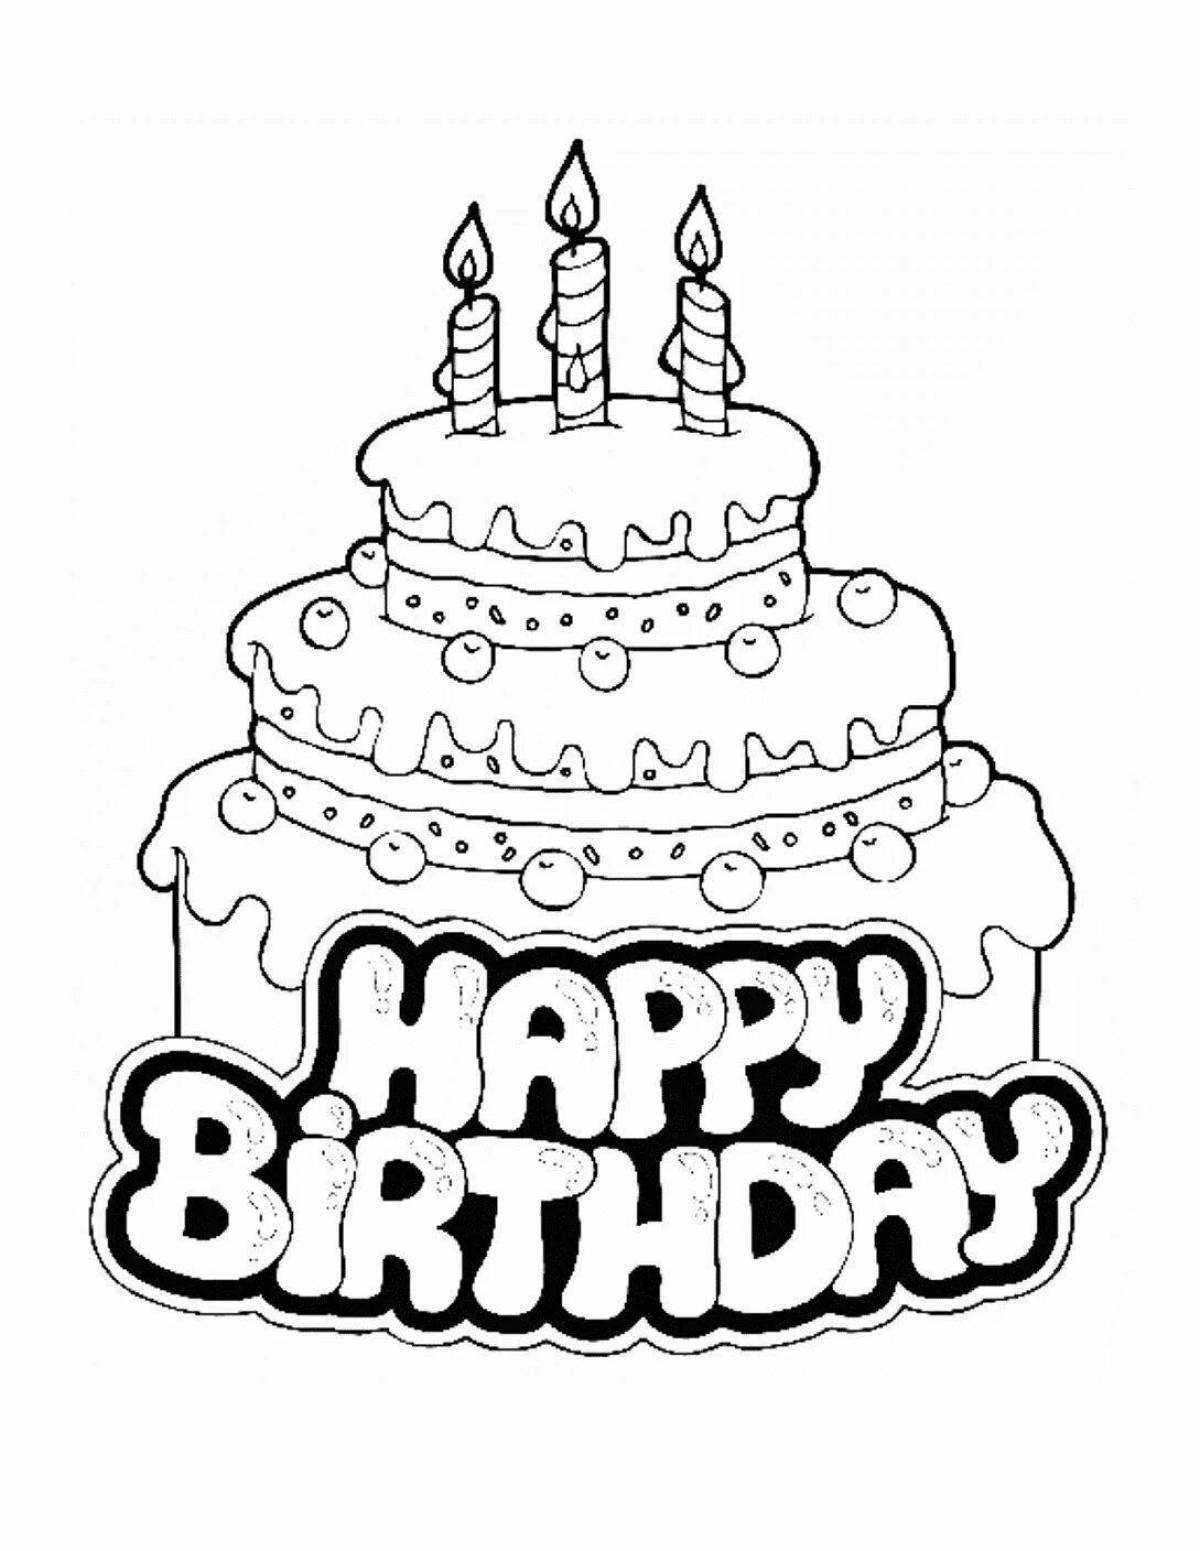 Coloring page cheerful happy birthday